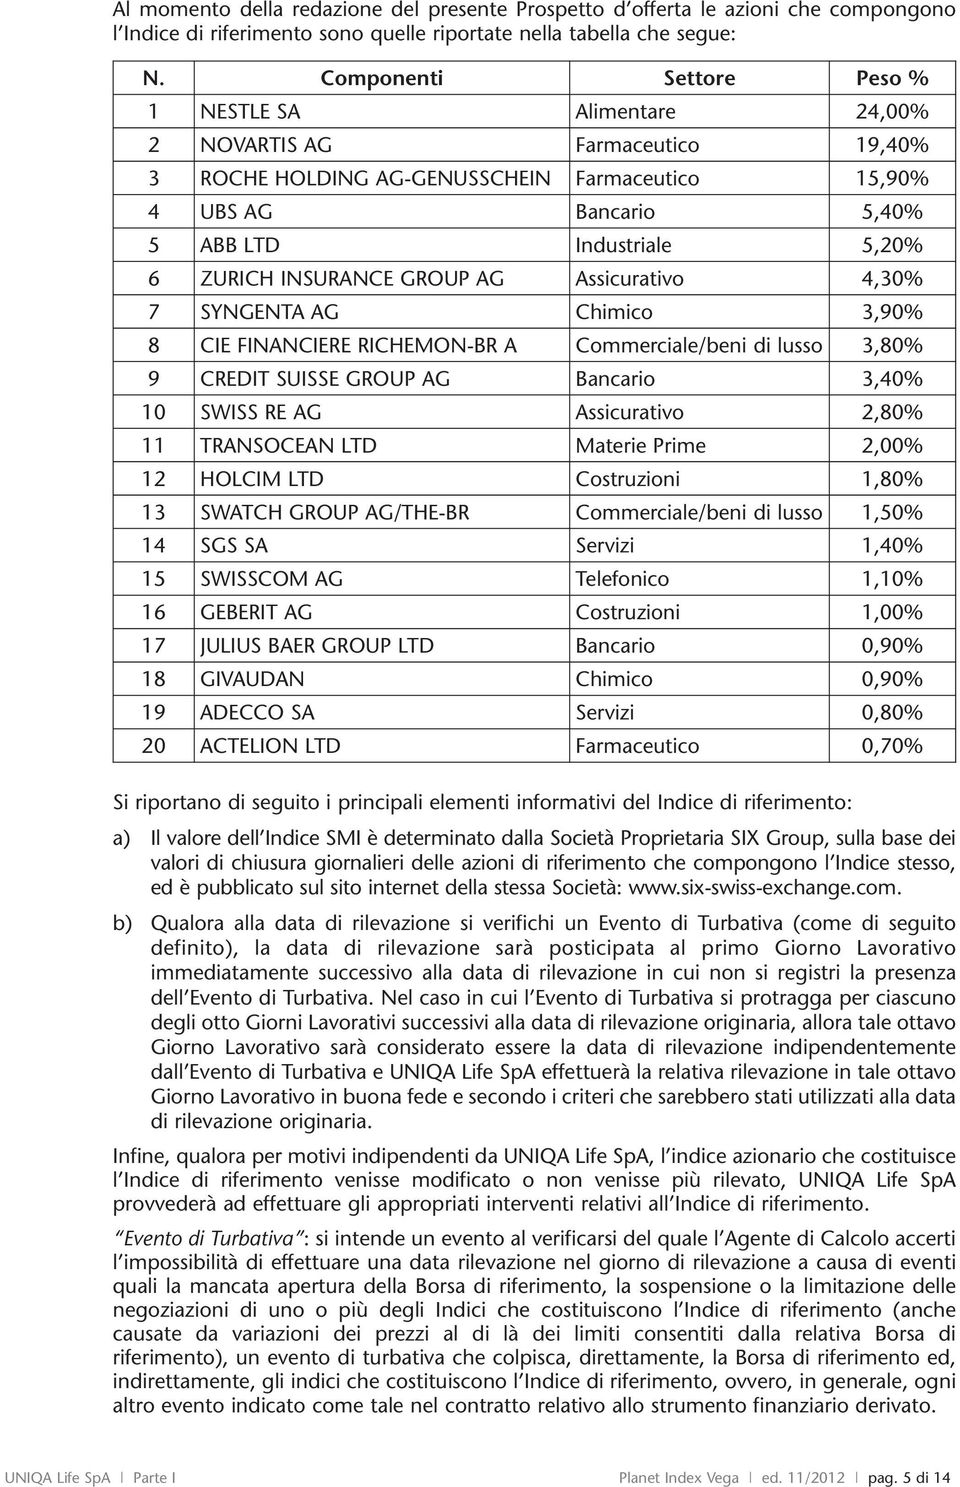 ZURICH INSURANCE GROUP AG Assicurativo 4,30% 7 SYNGENTA AG Chimico 3,90% 8 CIE FINANCIERE RICHEMON-BR A Commerciale/beni di lusso 3,80% 9 CREDIT SUISSE GROUP AG Bancario 3,40% 10 SWISS RE AG